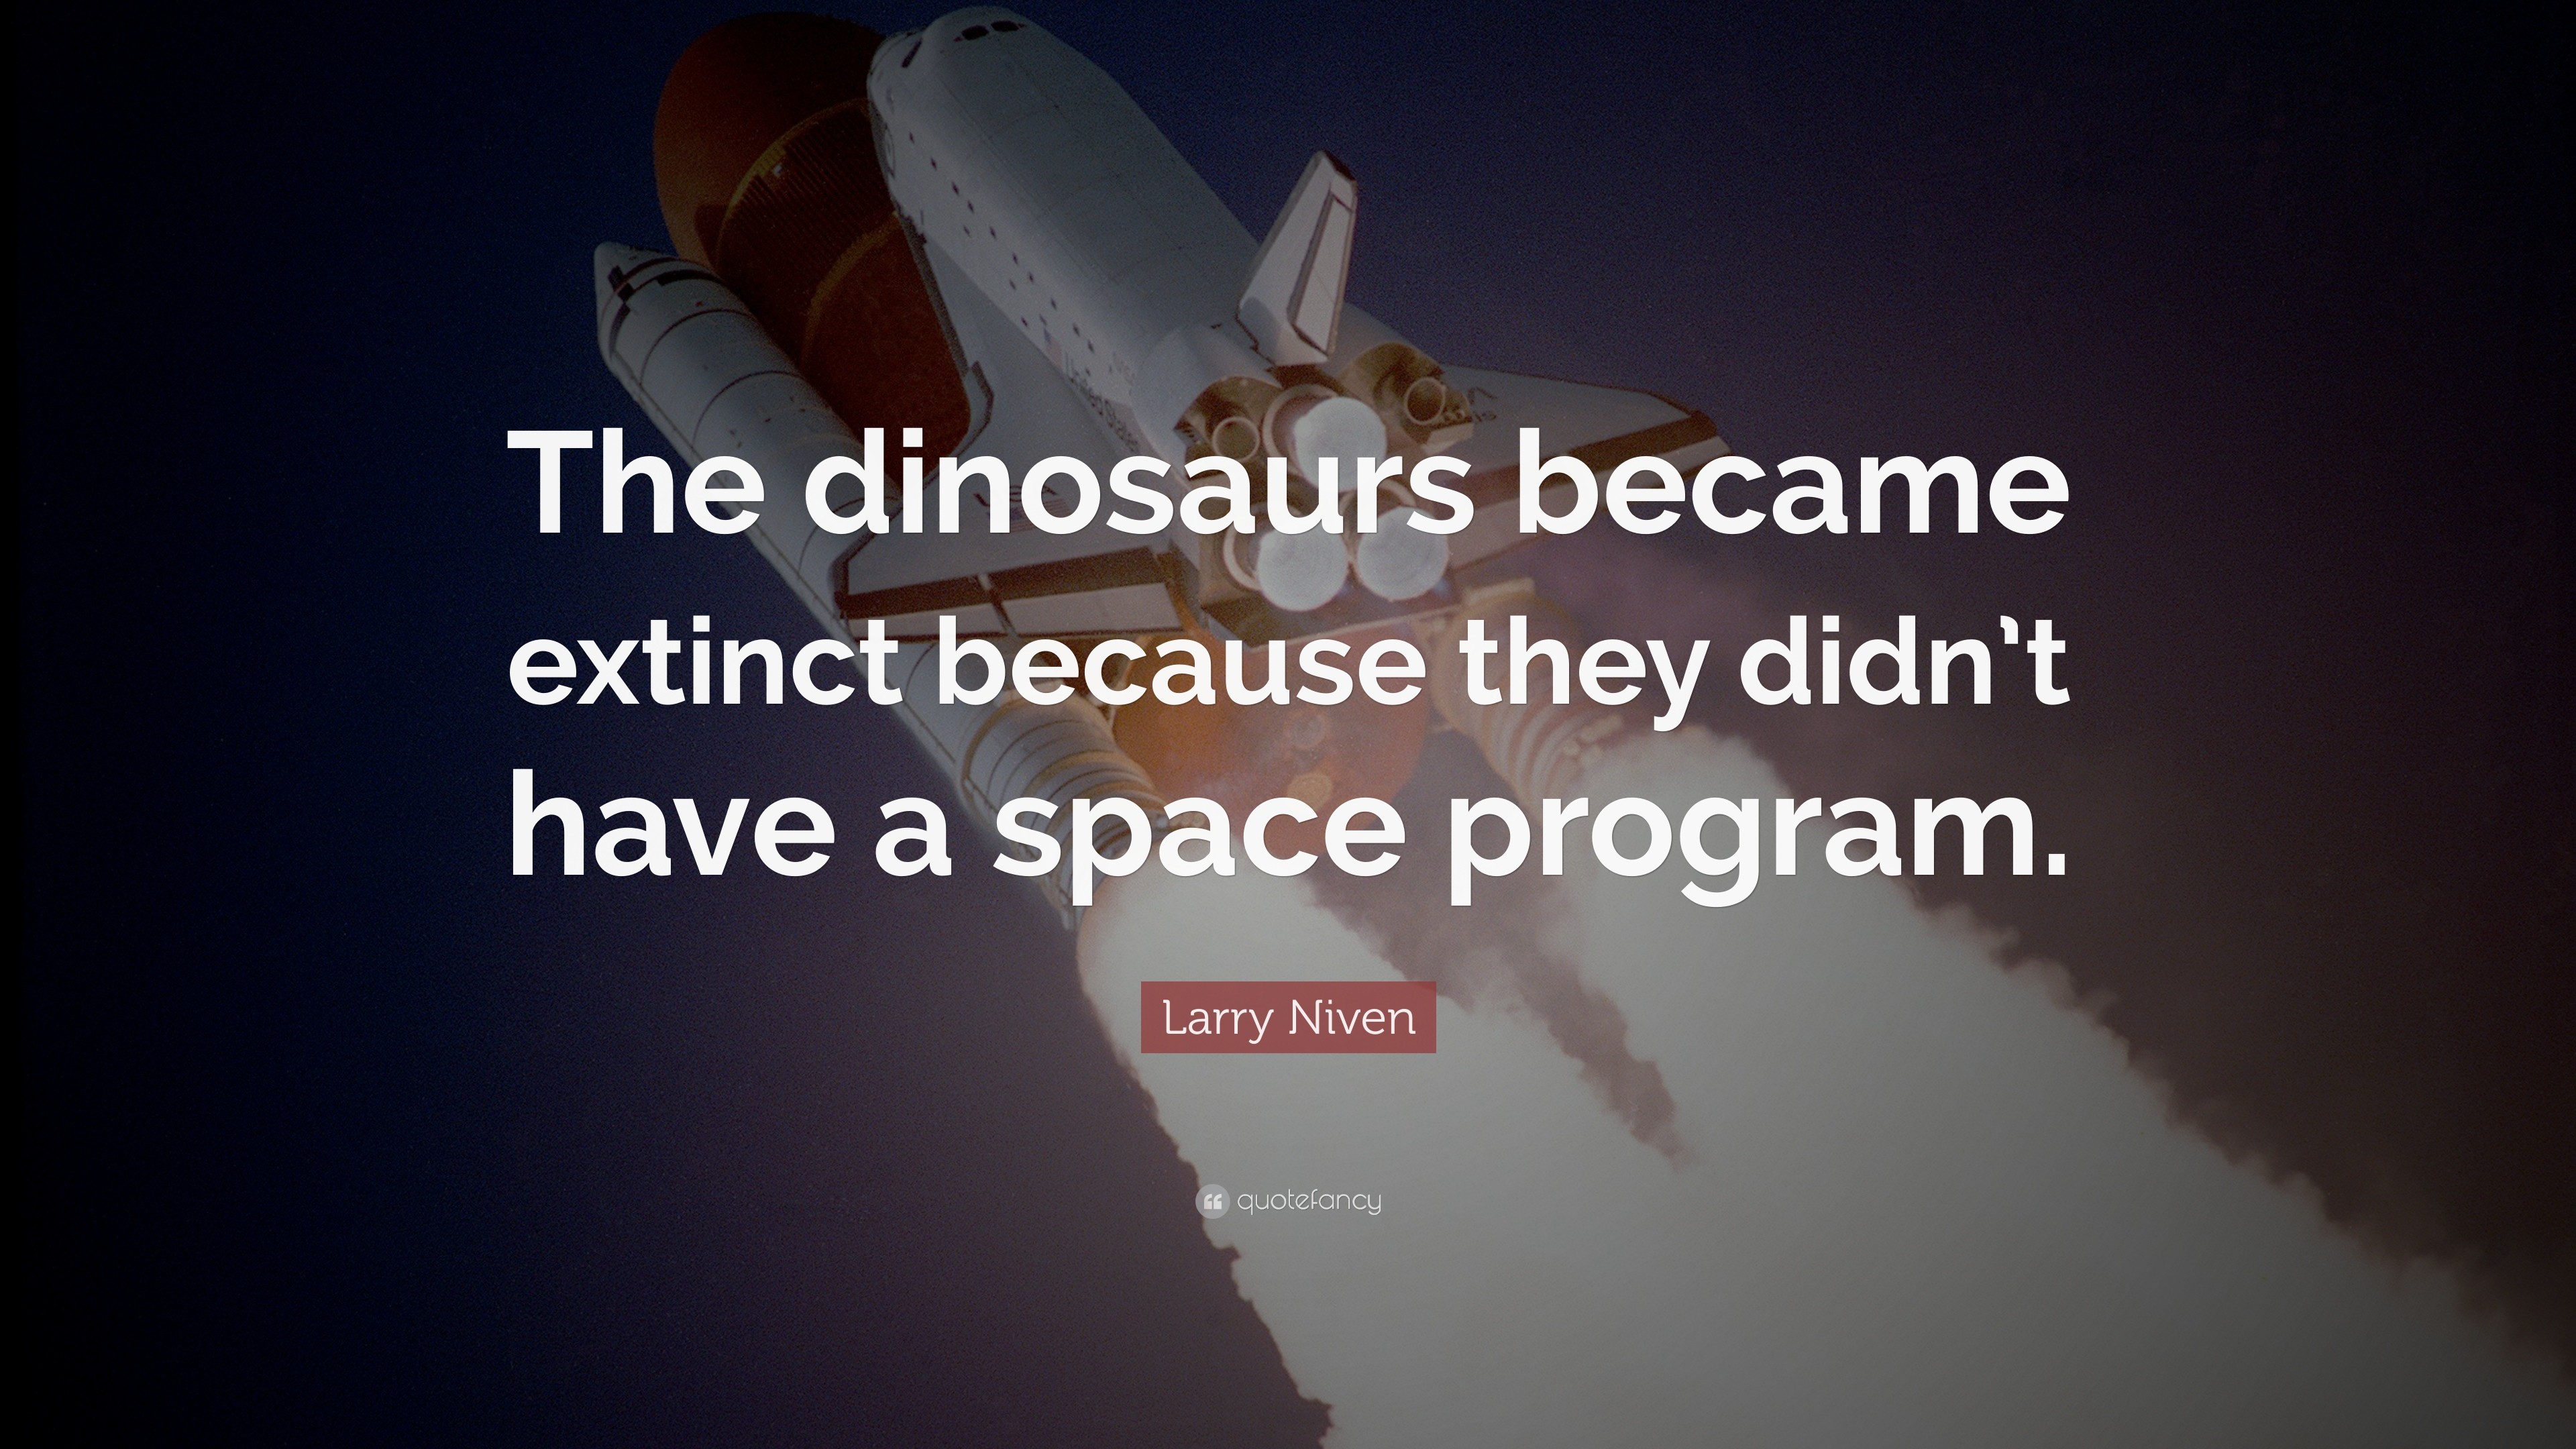 3840x2160 Space Quotes: “The dinosaurs became extinct because they didn't have a space